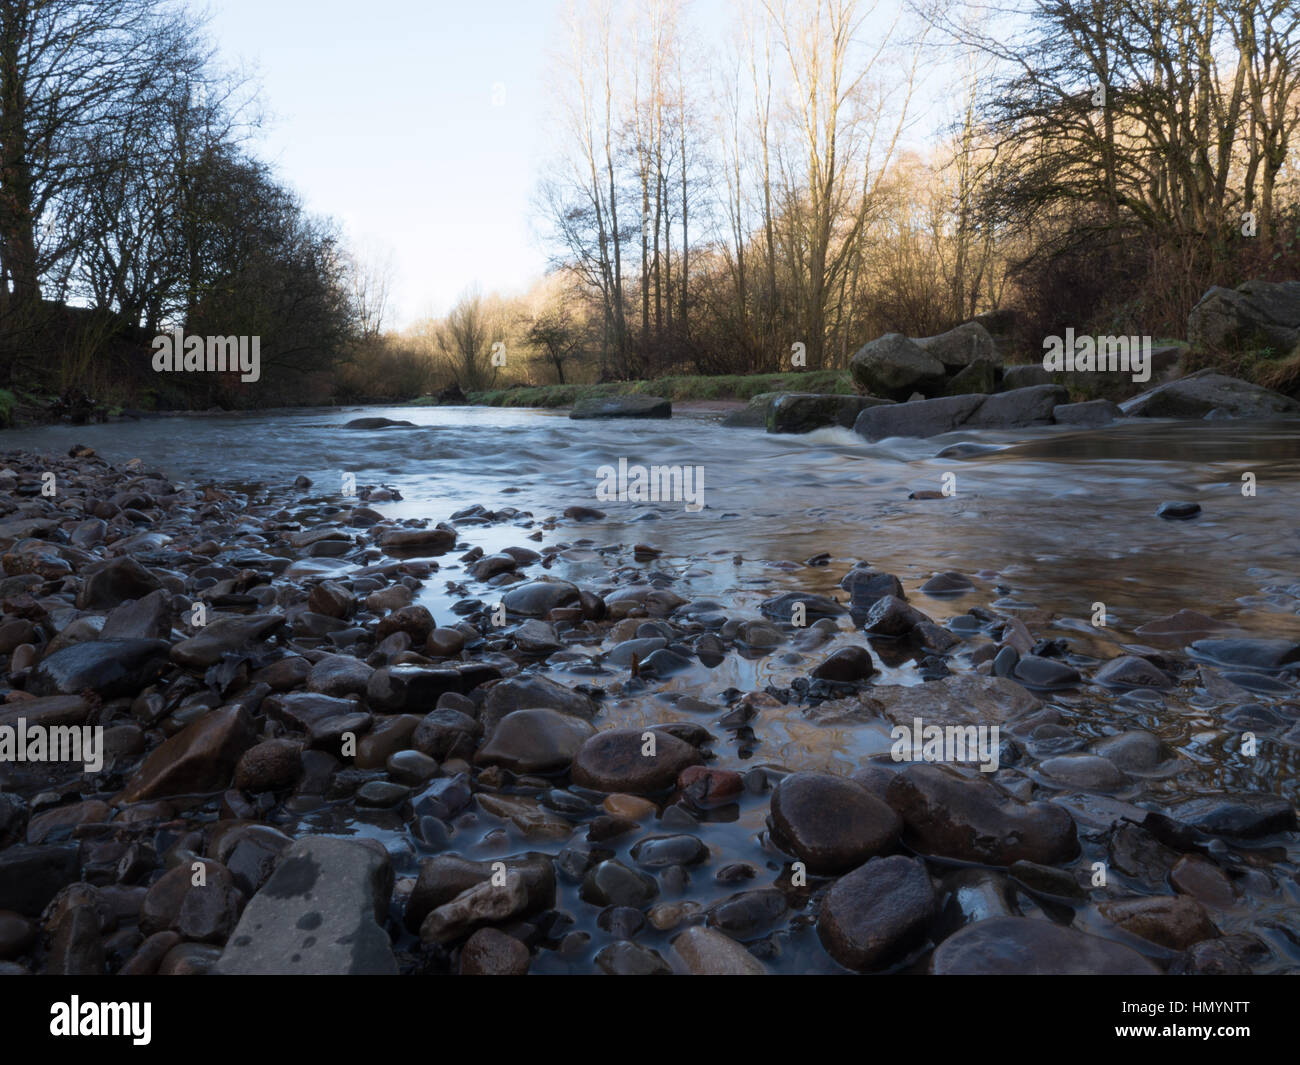 The River Medlock running through Daisy Nook Country Park in Oldham, Greater Manchester Stock Photo